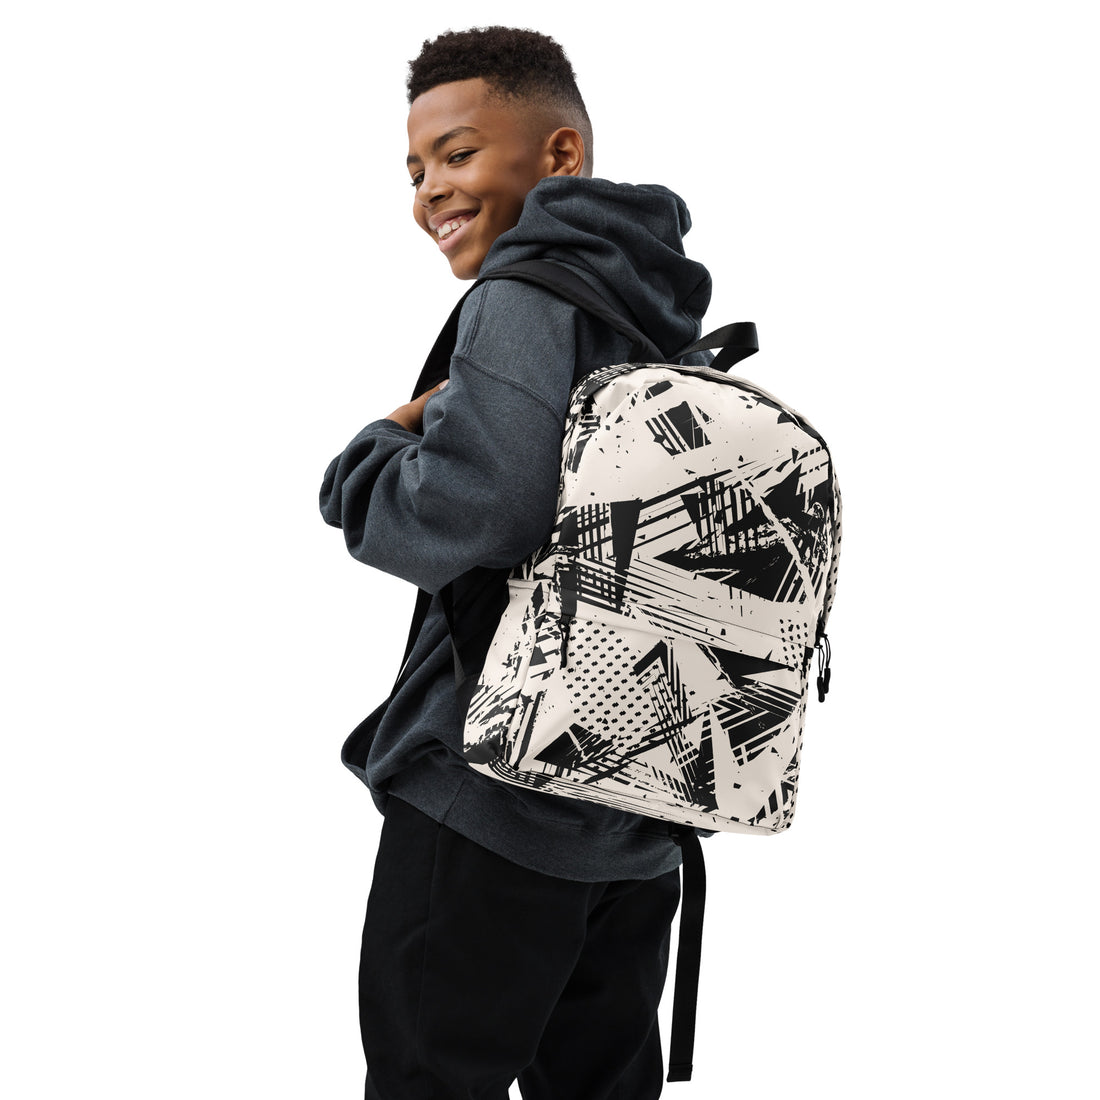 Black Graphic Backpack